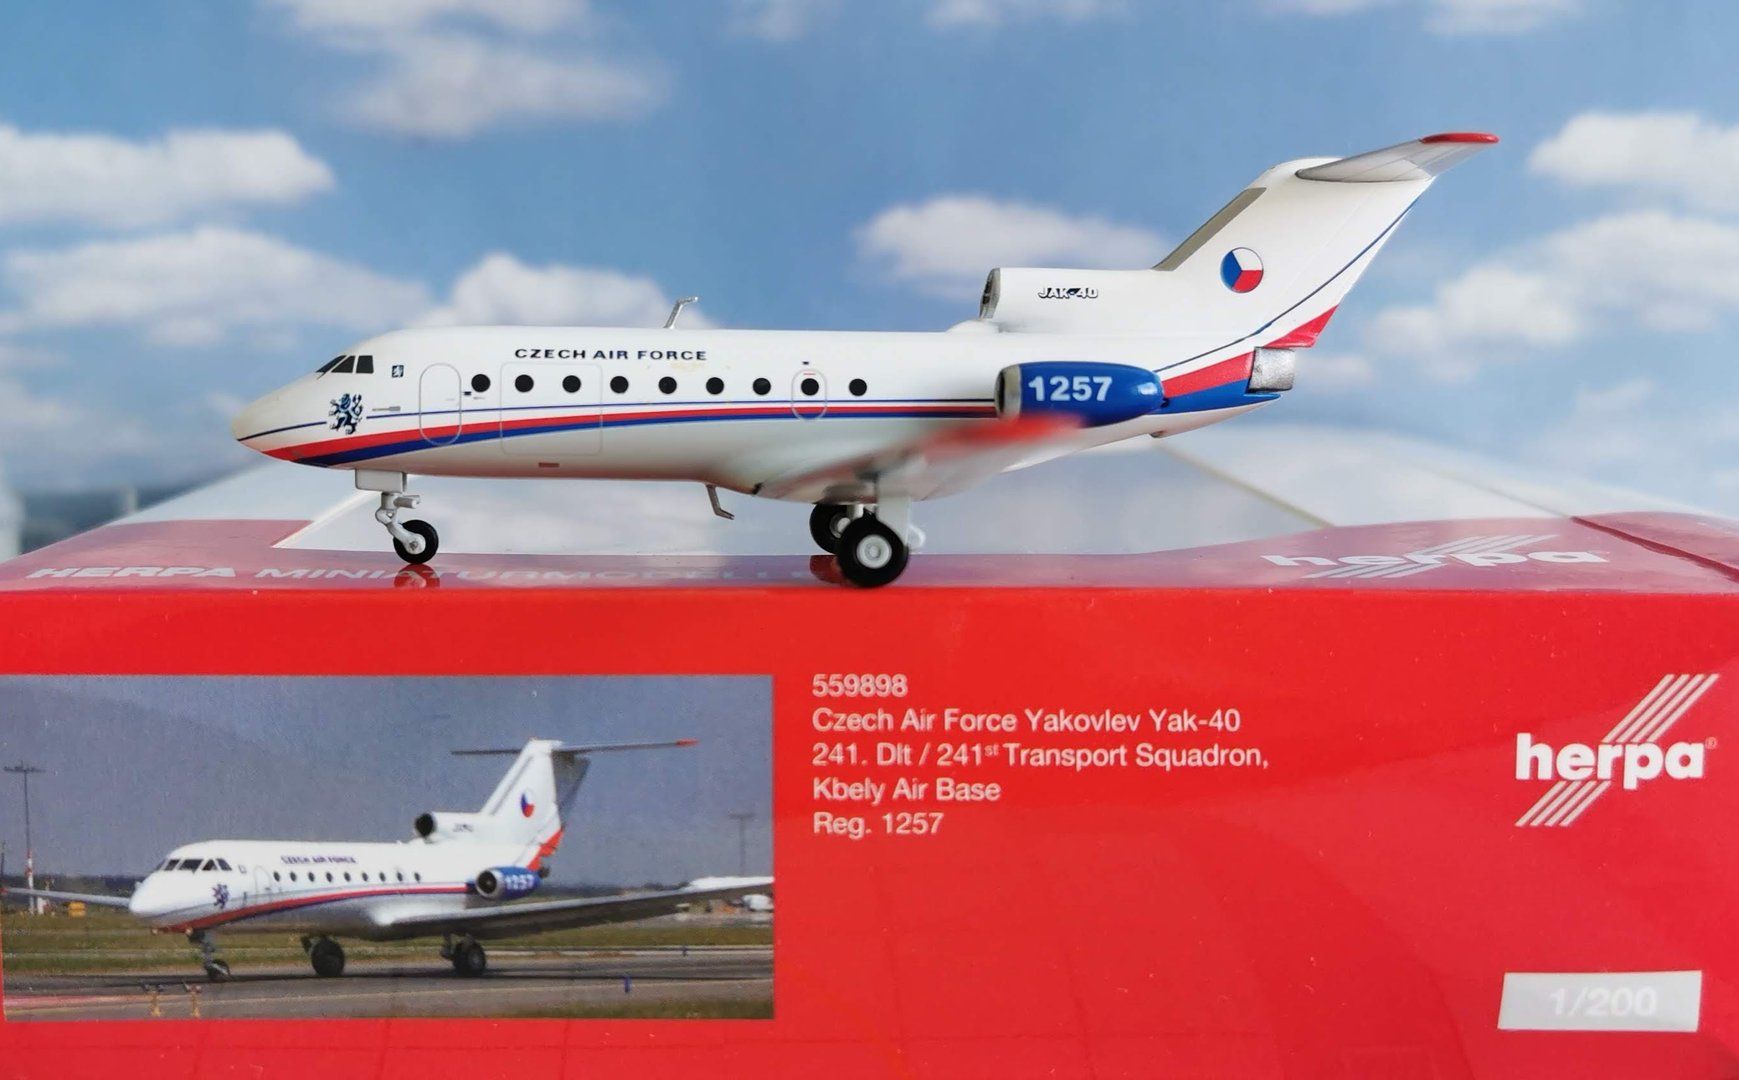 Herpa Wings Czech Air Force Yak-40241st Squadron 559898